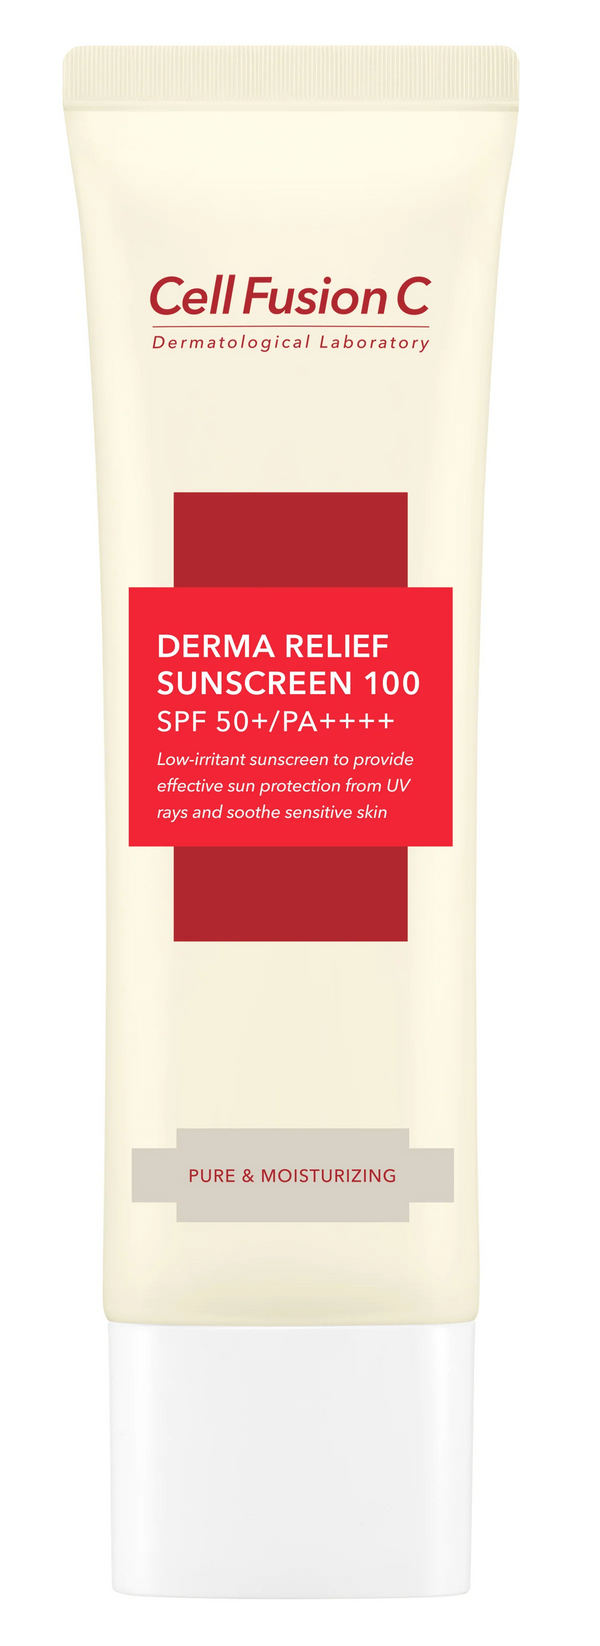 [CellFusionC] Derma Relief Sunscreen SPF50+ / PA++++ - 50ml 1